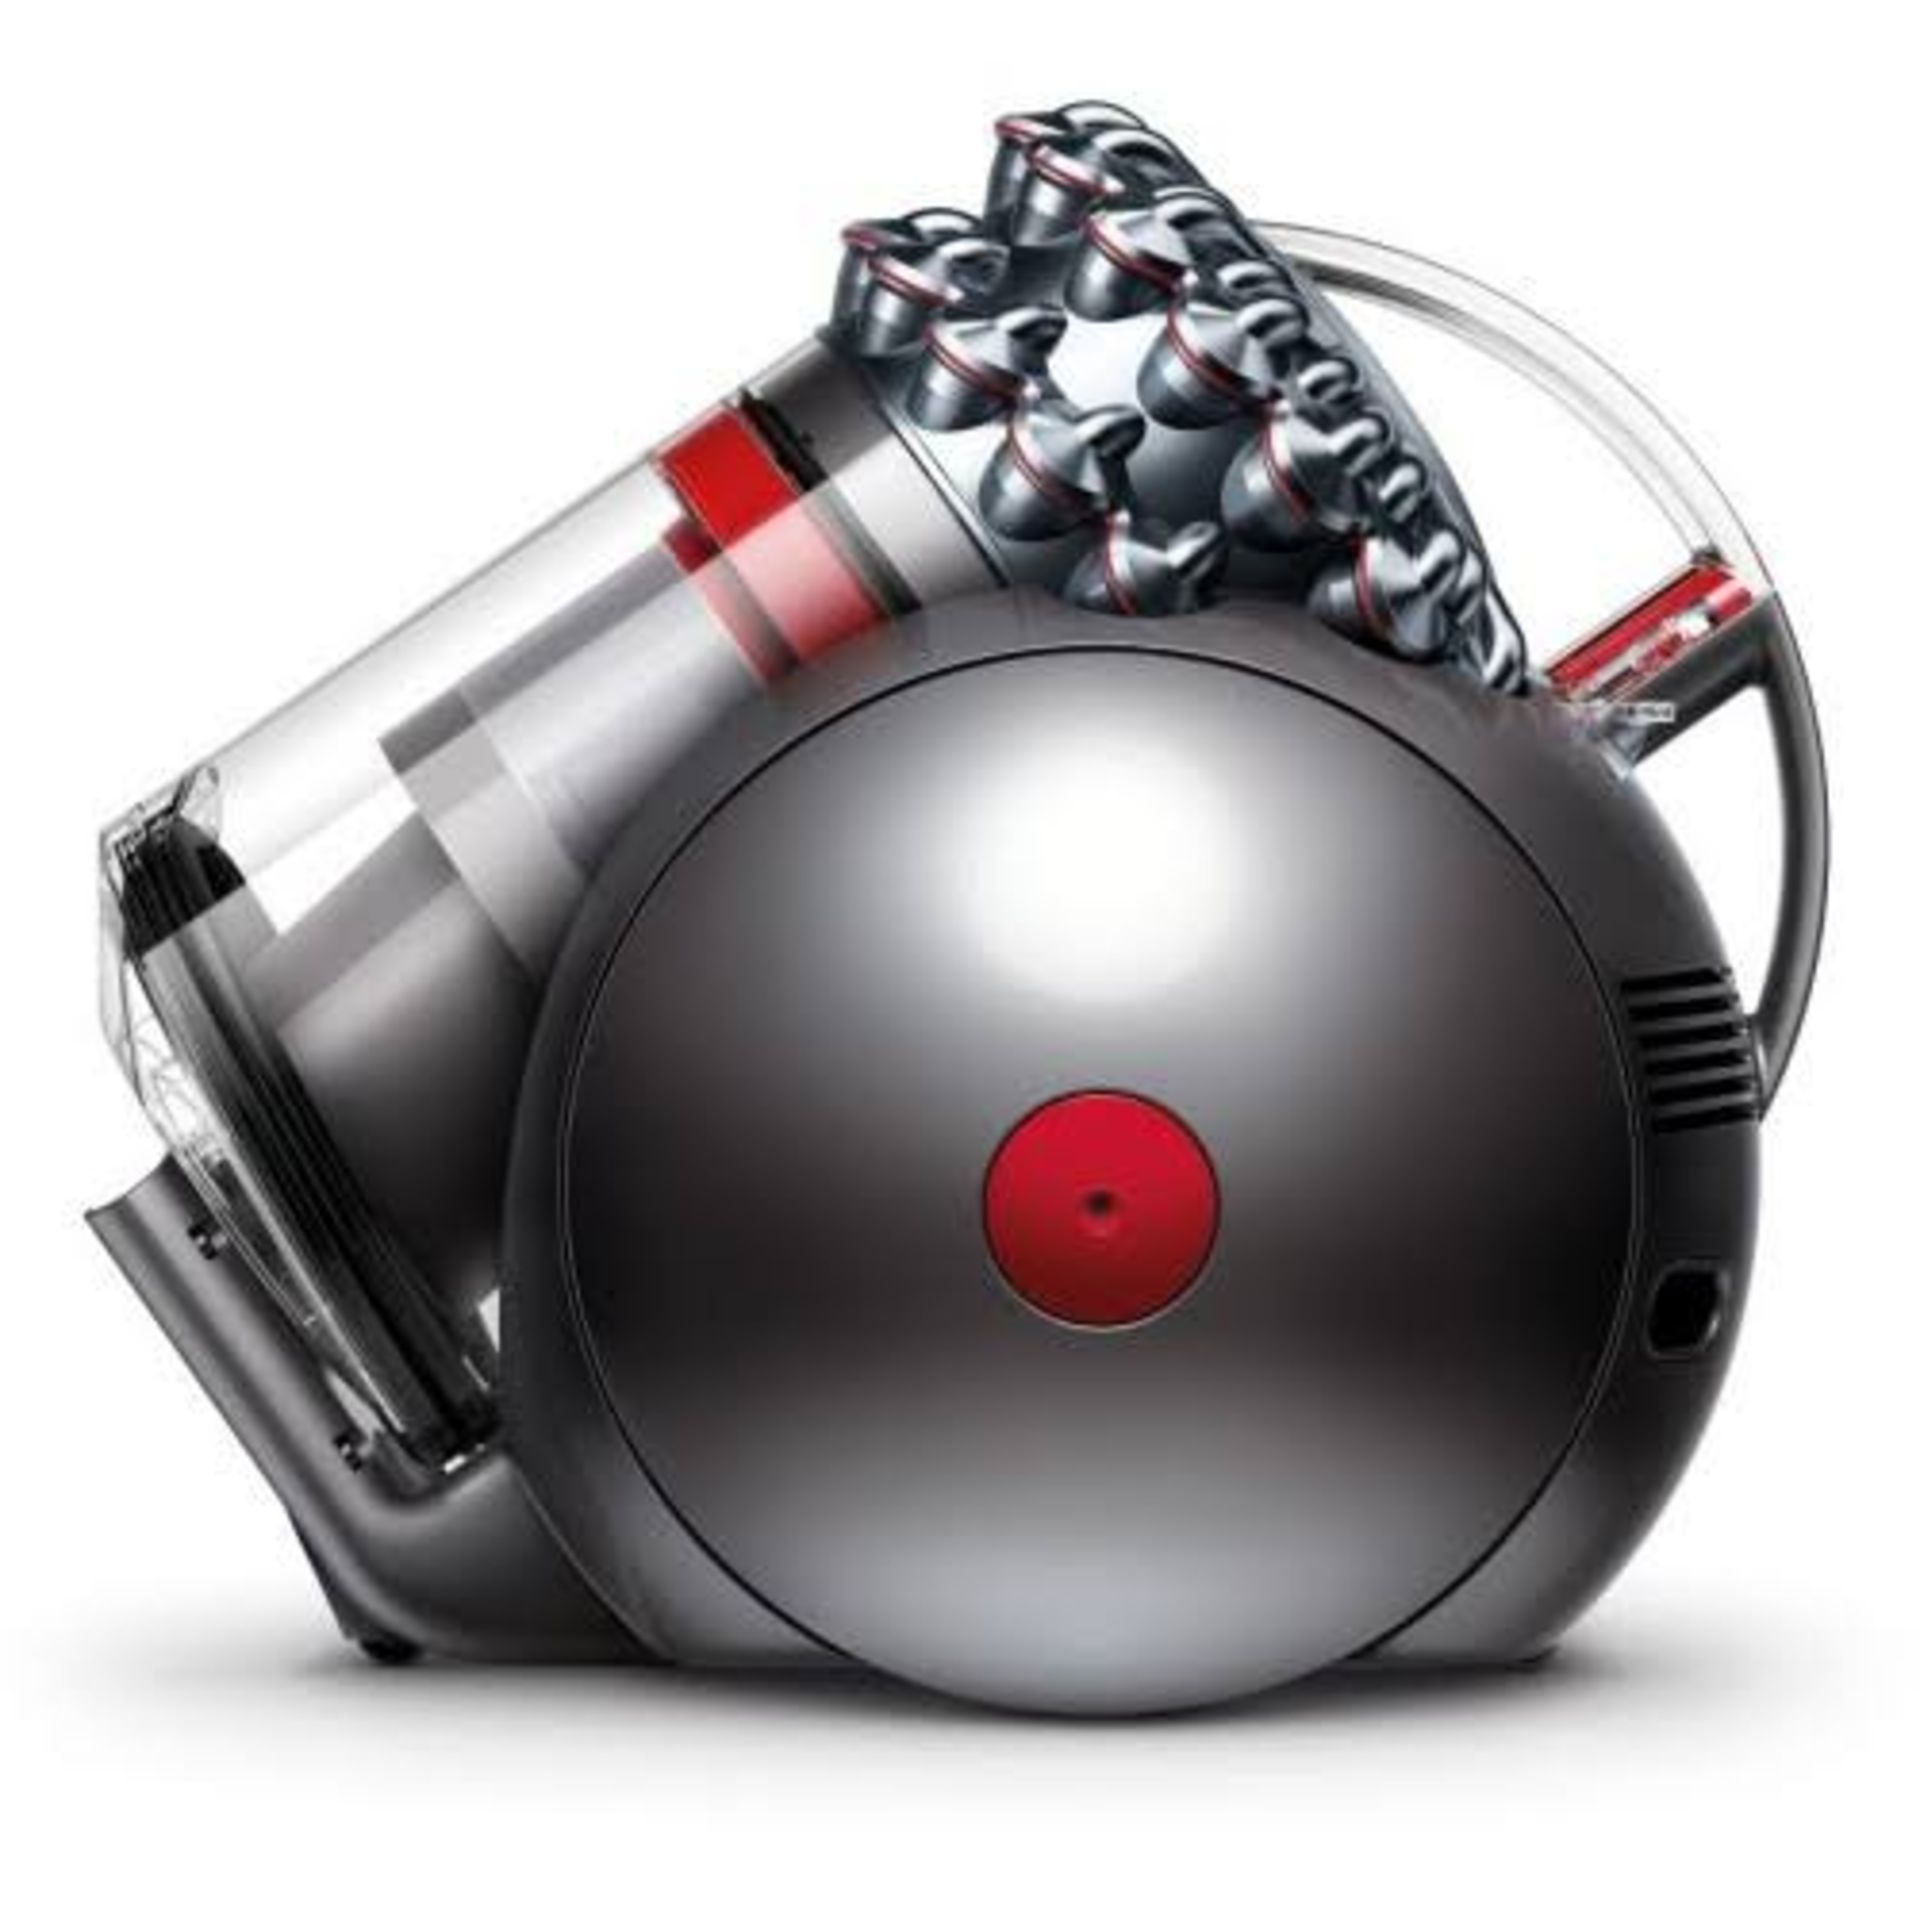 V Brand New Dyson Cinetic Big Ball Animal+ Vacuum Cleaner NO Filters NO Bags - Self Righting - - Image 2 of 4